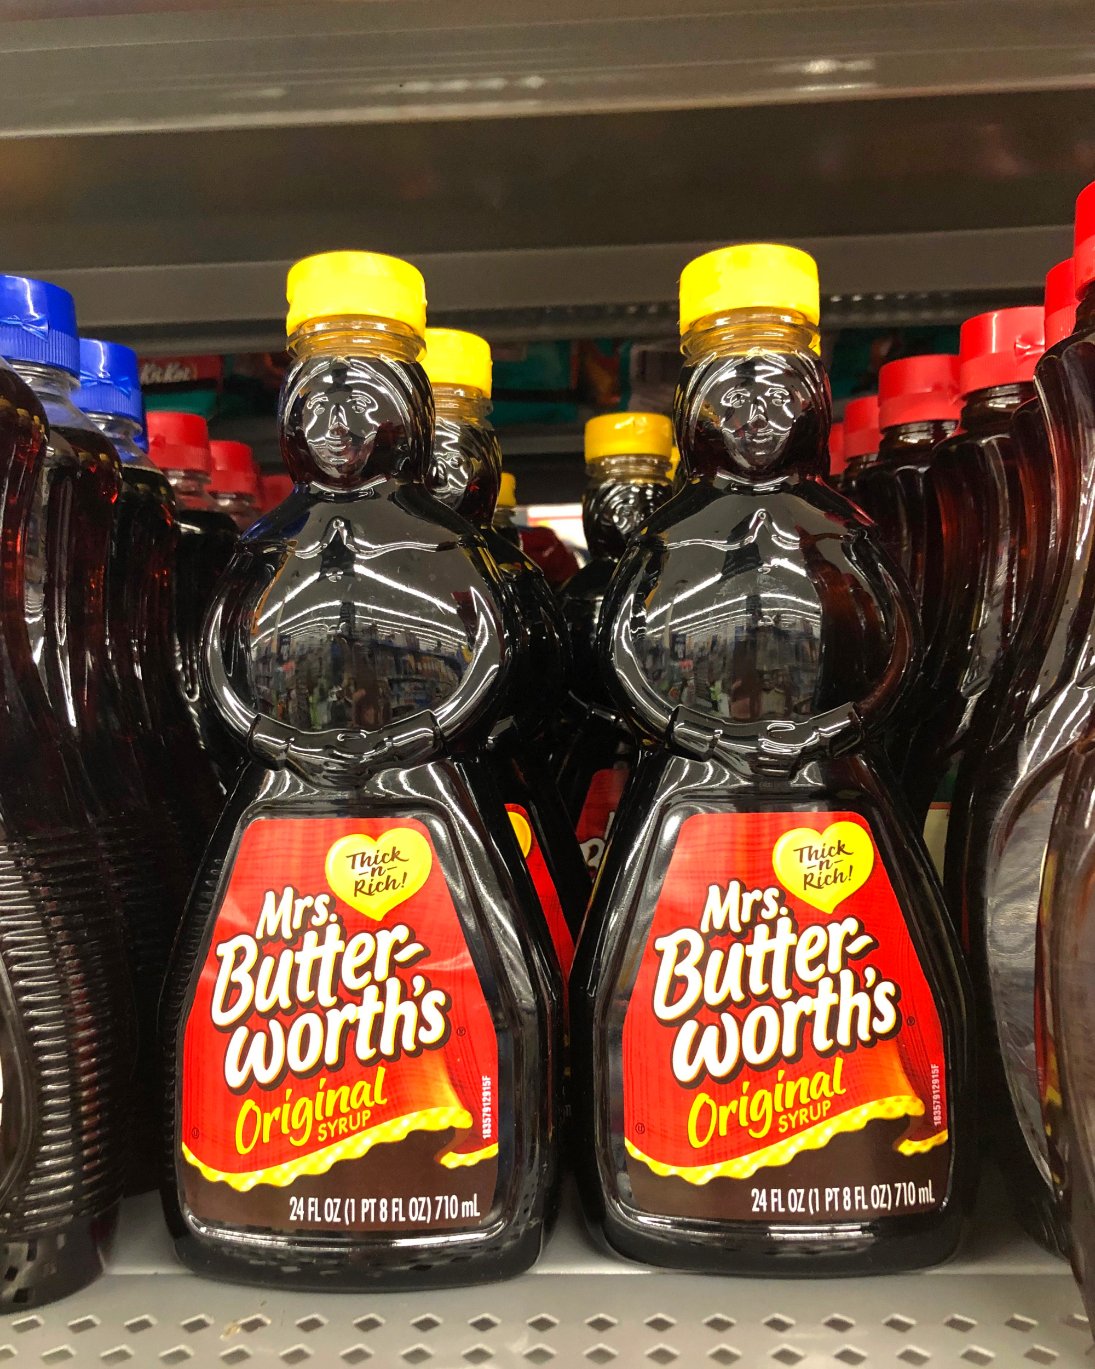 What Happened With the Mrs. Butterworth’s Bottle Change?